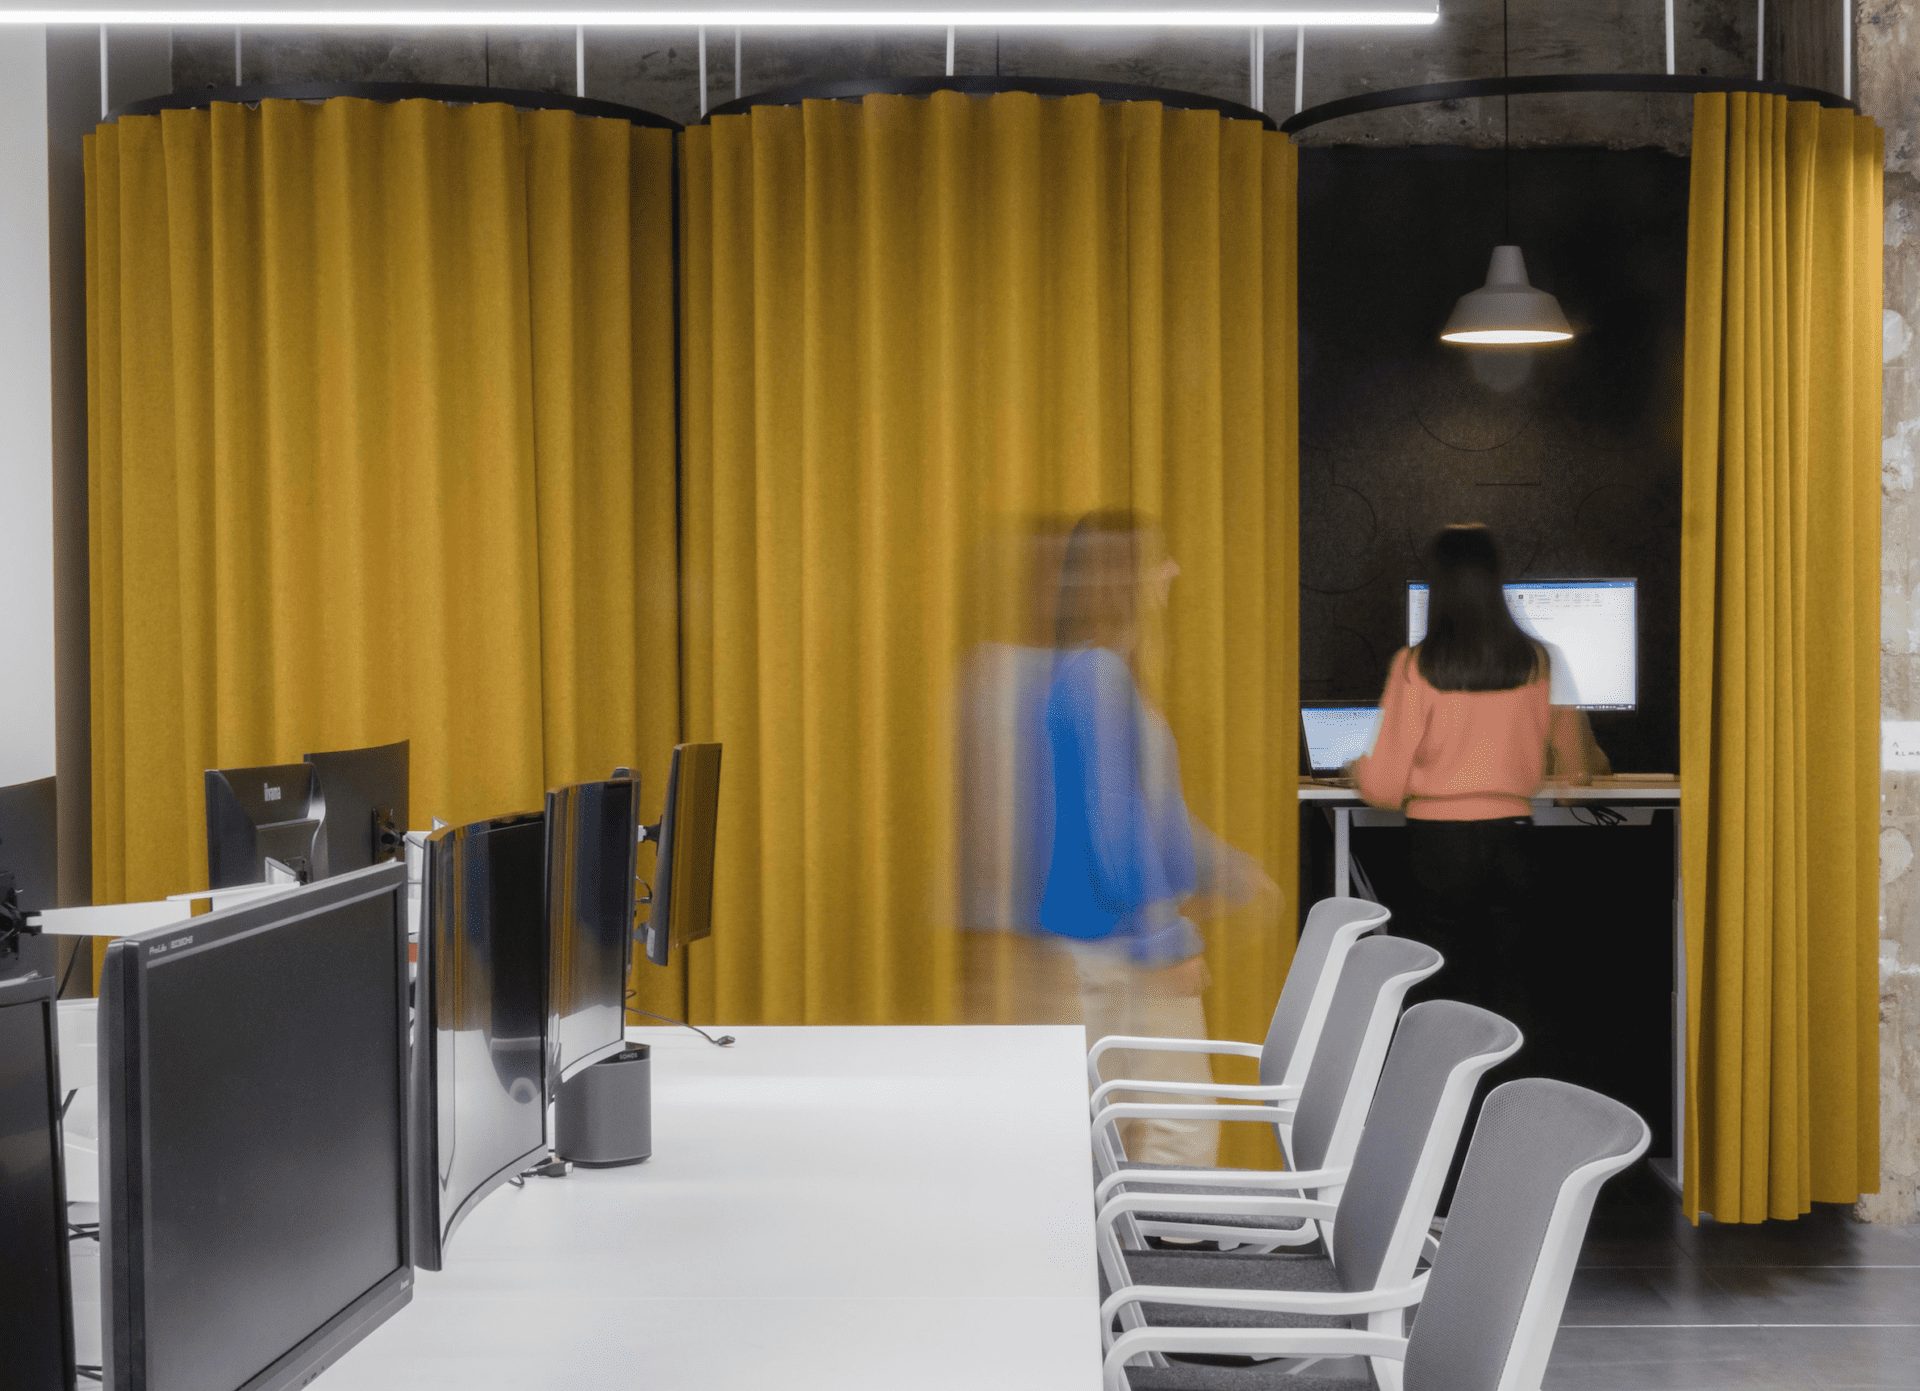 bdg, future office, sustainability, sea containers london, london office, OnOffice magazine